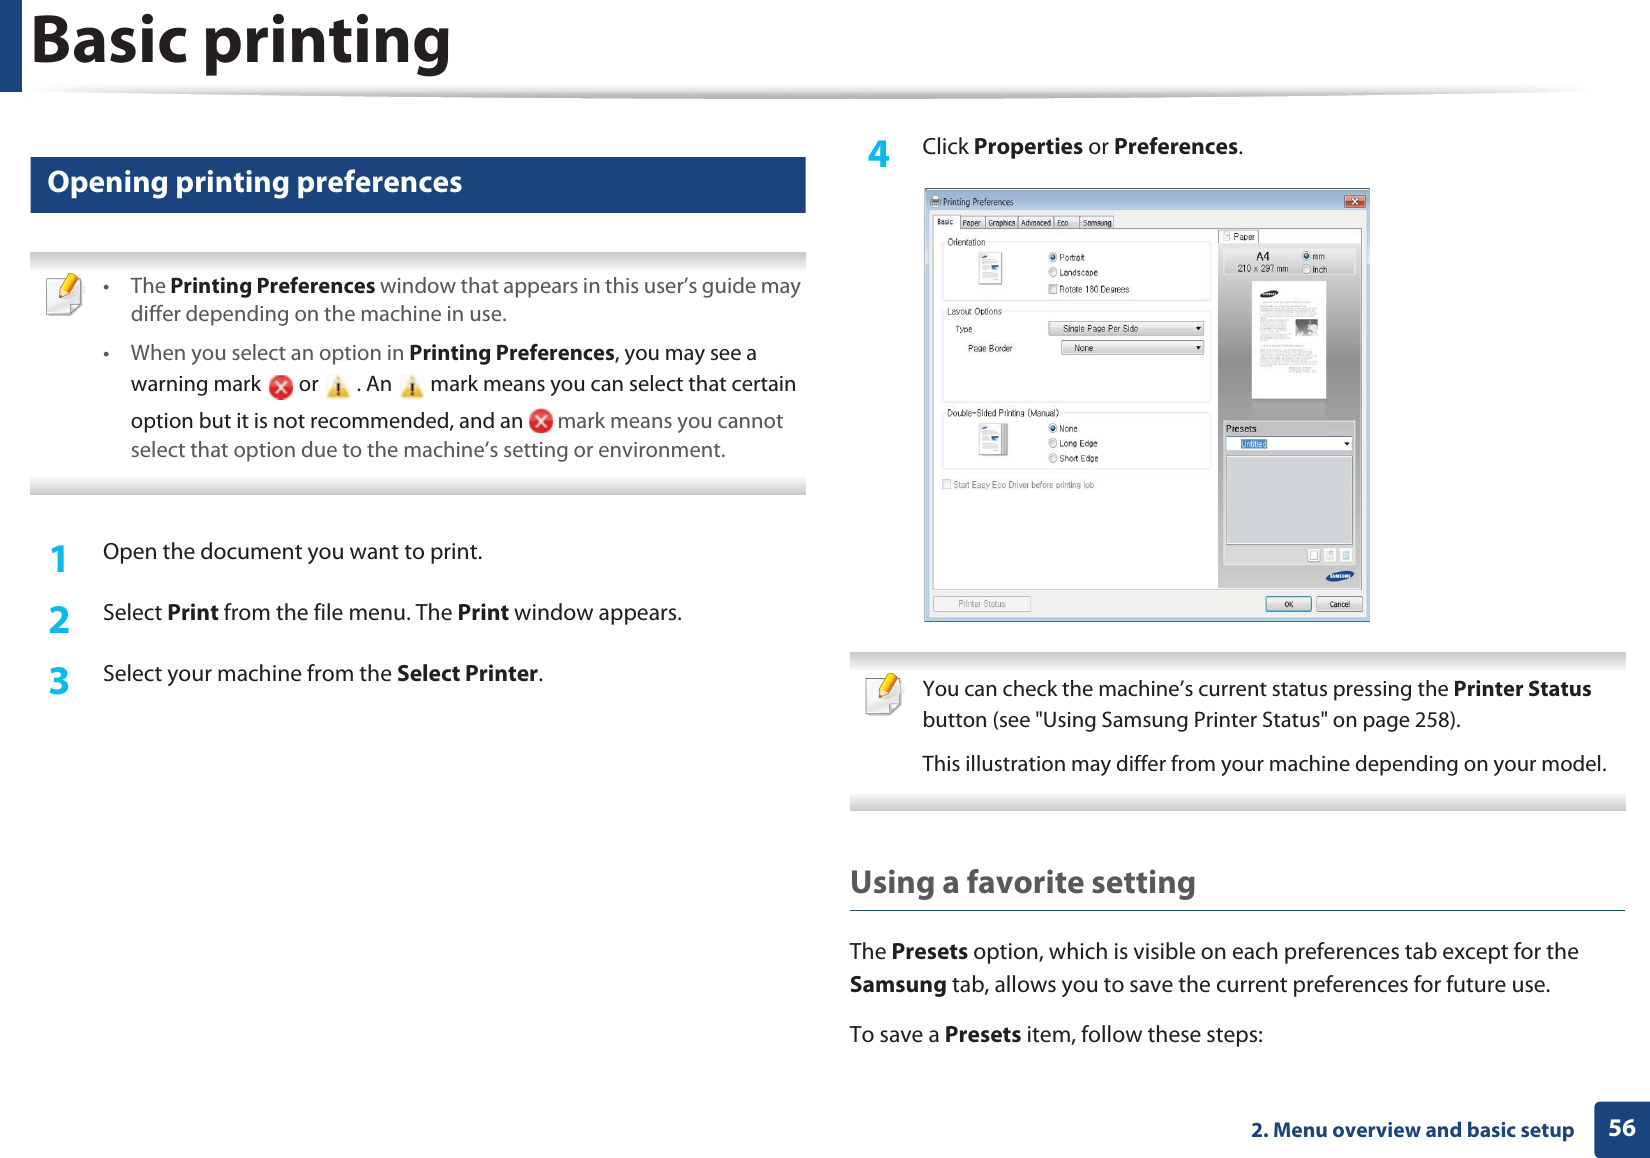 Basic printing562. Menu overview and basic setup11 Opening printing preferences • The Printing Preferences window that appears in this user’s guide may differ depending on the machine in use. • When you select an option in Printing Preferences, you may see a warning mark   or   . An   mark means you can select that certain option but it is not recommended, and an   mark means you cannot select that option due to the machine’s setting or environment. 1Open the document you want to print.2  Select Print from the file menu. The Print window appears. 3  Select your machine from the Select Printer. 4  Click Properties or Preferences.  You can check the machine’s current status pressing the Printer Status button (see &quot;Using Samsung Printer Status&quot; on page 258).This illustration may differ from your machine depending on your model. Using a favorite settingThe Presets option, which is visible on each preferences tab except for the Samsung tab, allows you to save the current preferences for future use.To save a Presets item, follow these steps: